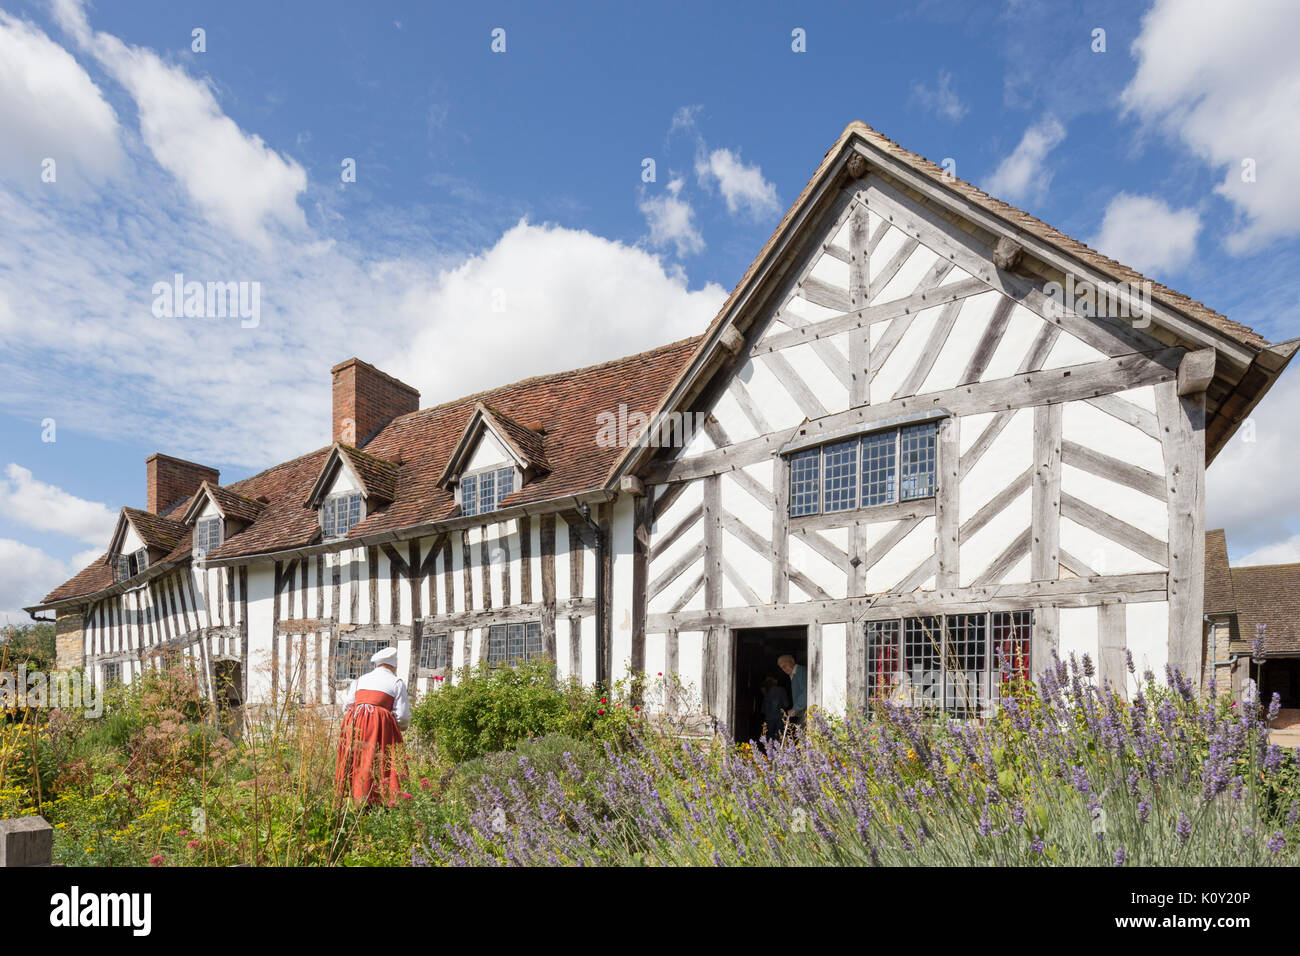 Mary Arden's Farm home of William Shakespeare's mother, Wilmcote, Stock Photo